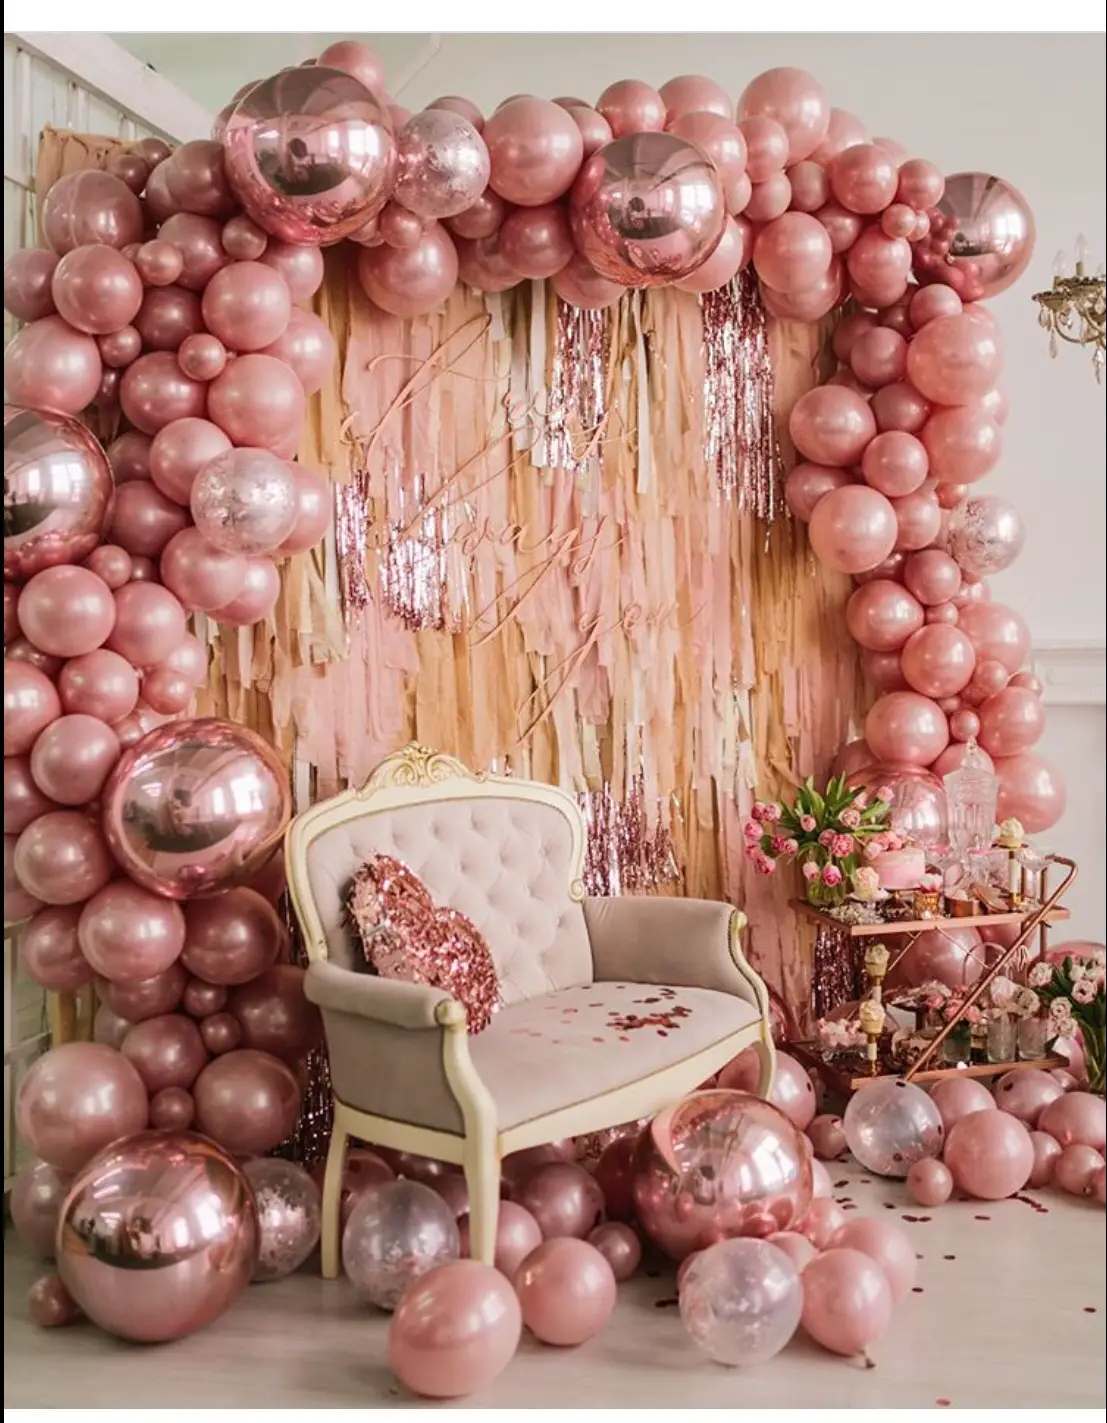 galentine's day party decor